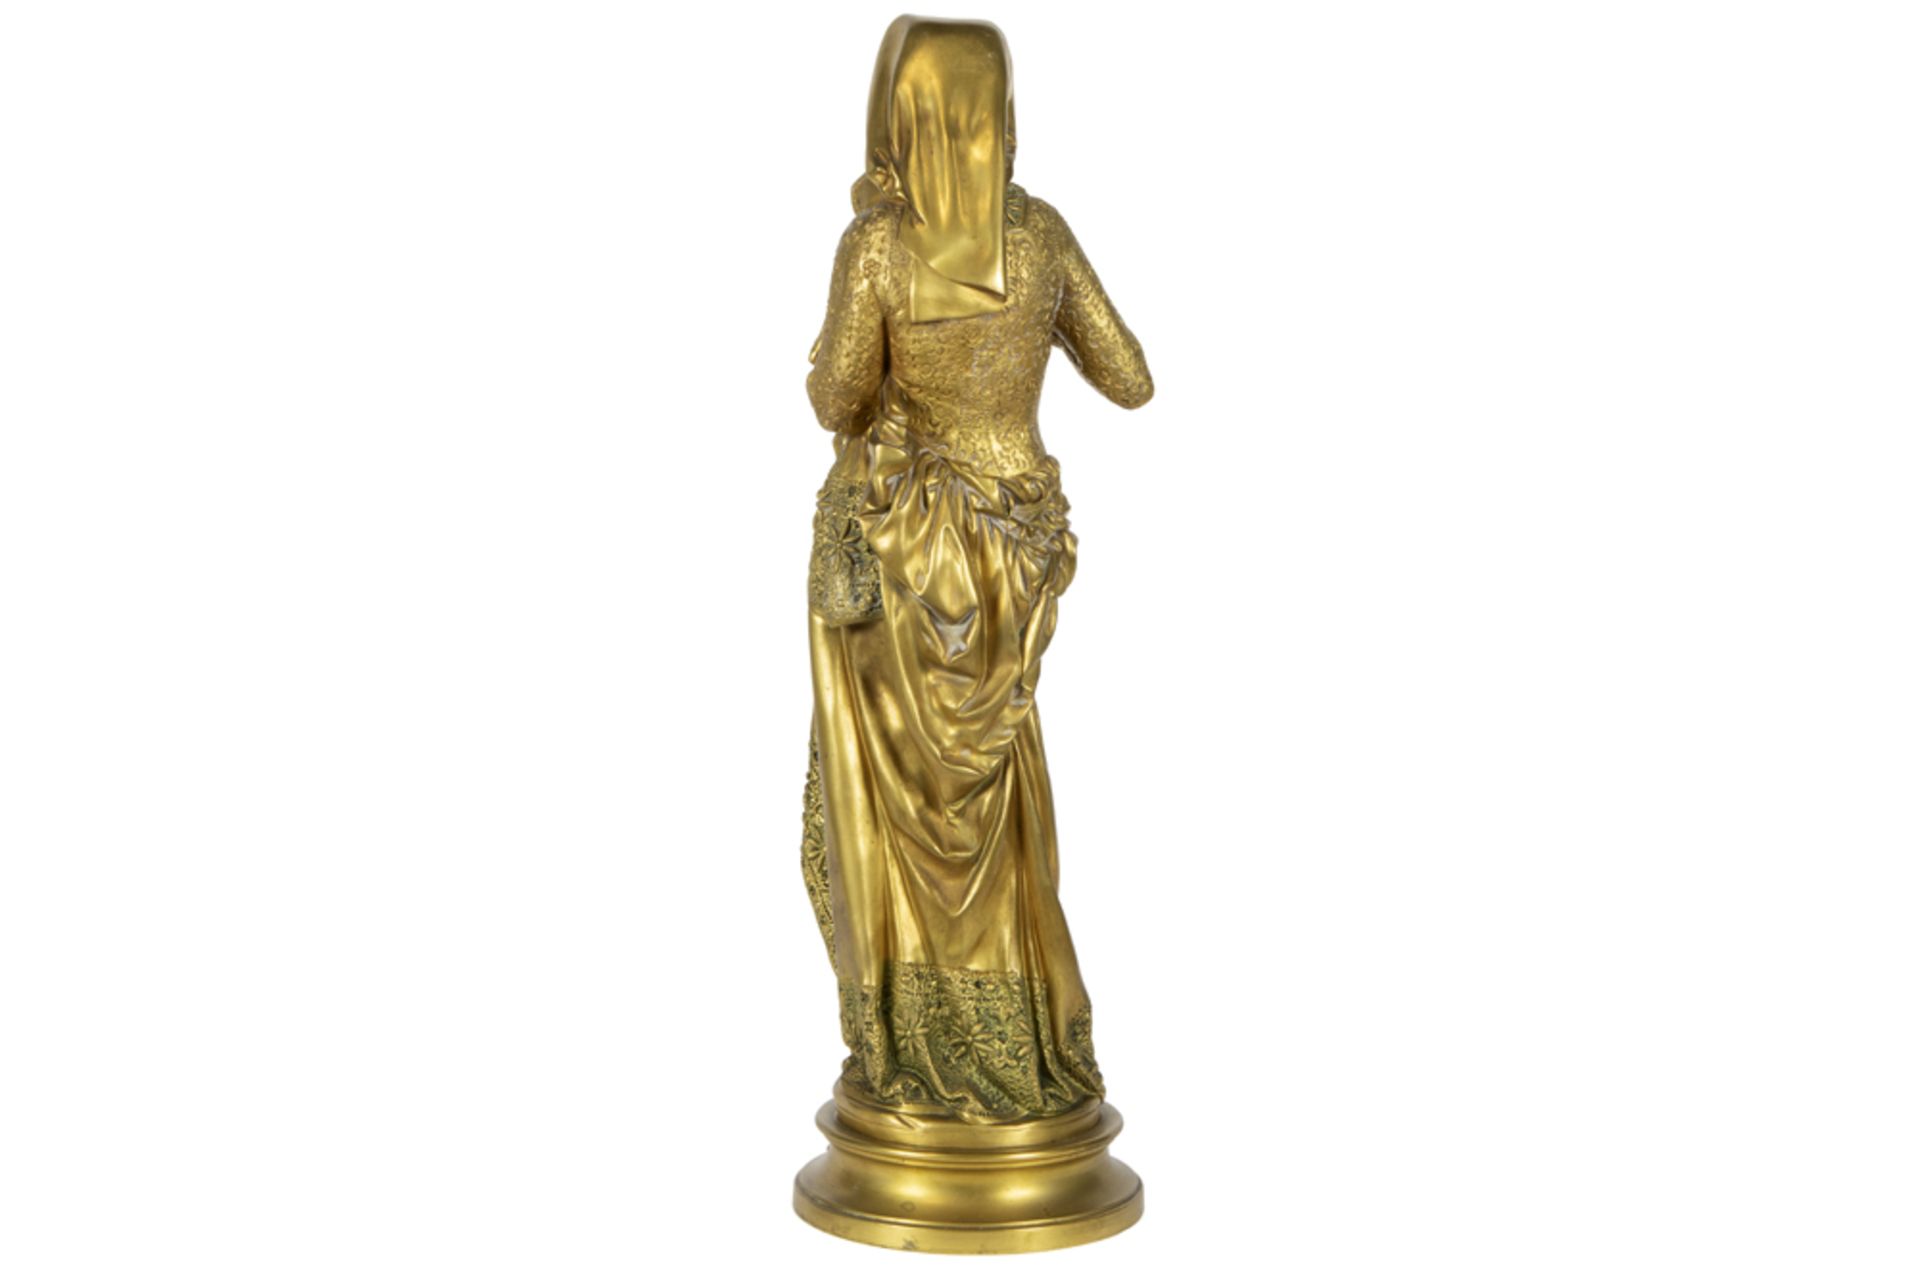 19th Cent.Carrier-Belleuse signed chryselephantine sculpture in gilded bronze and ivory - with - Image 4 of 7